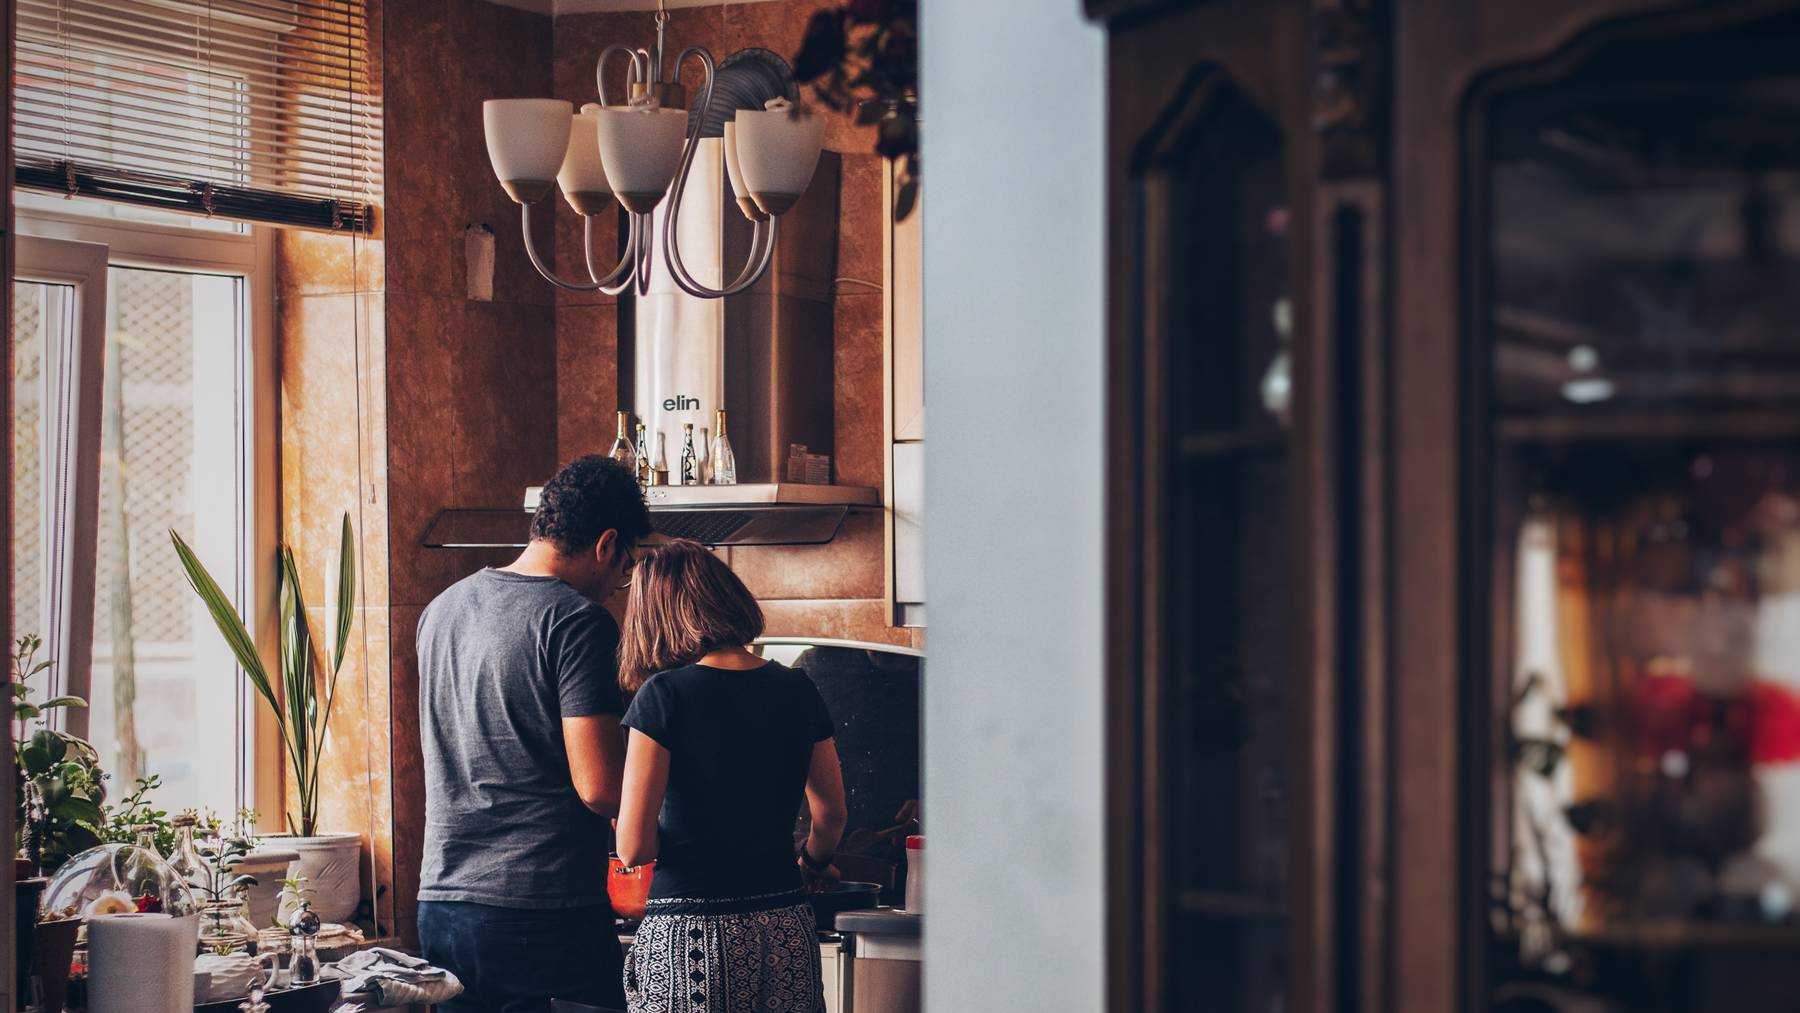 A couple standing together in their kitchen